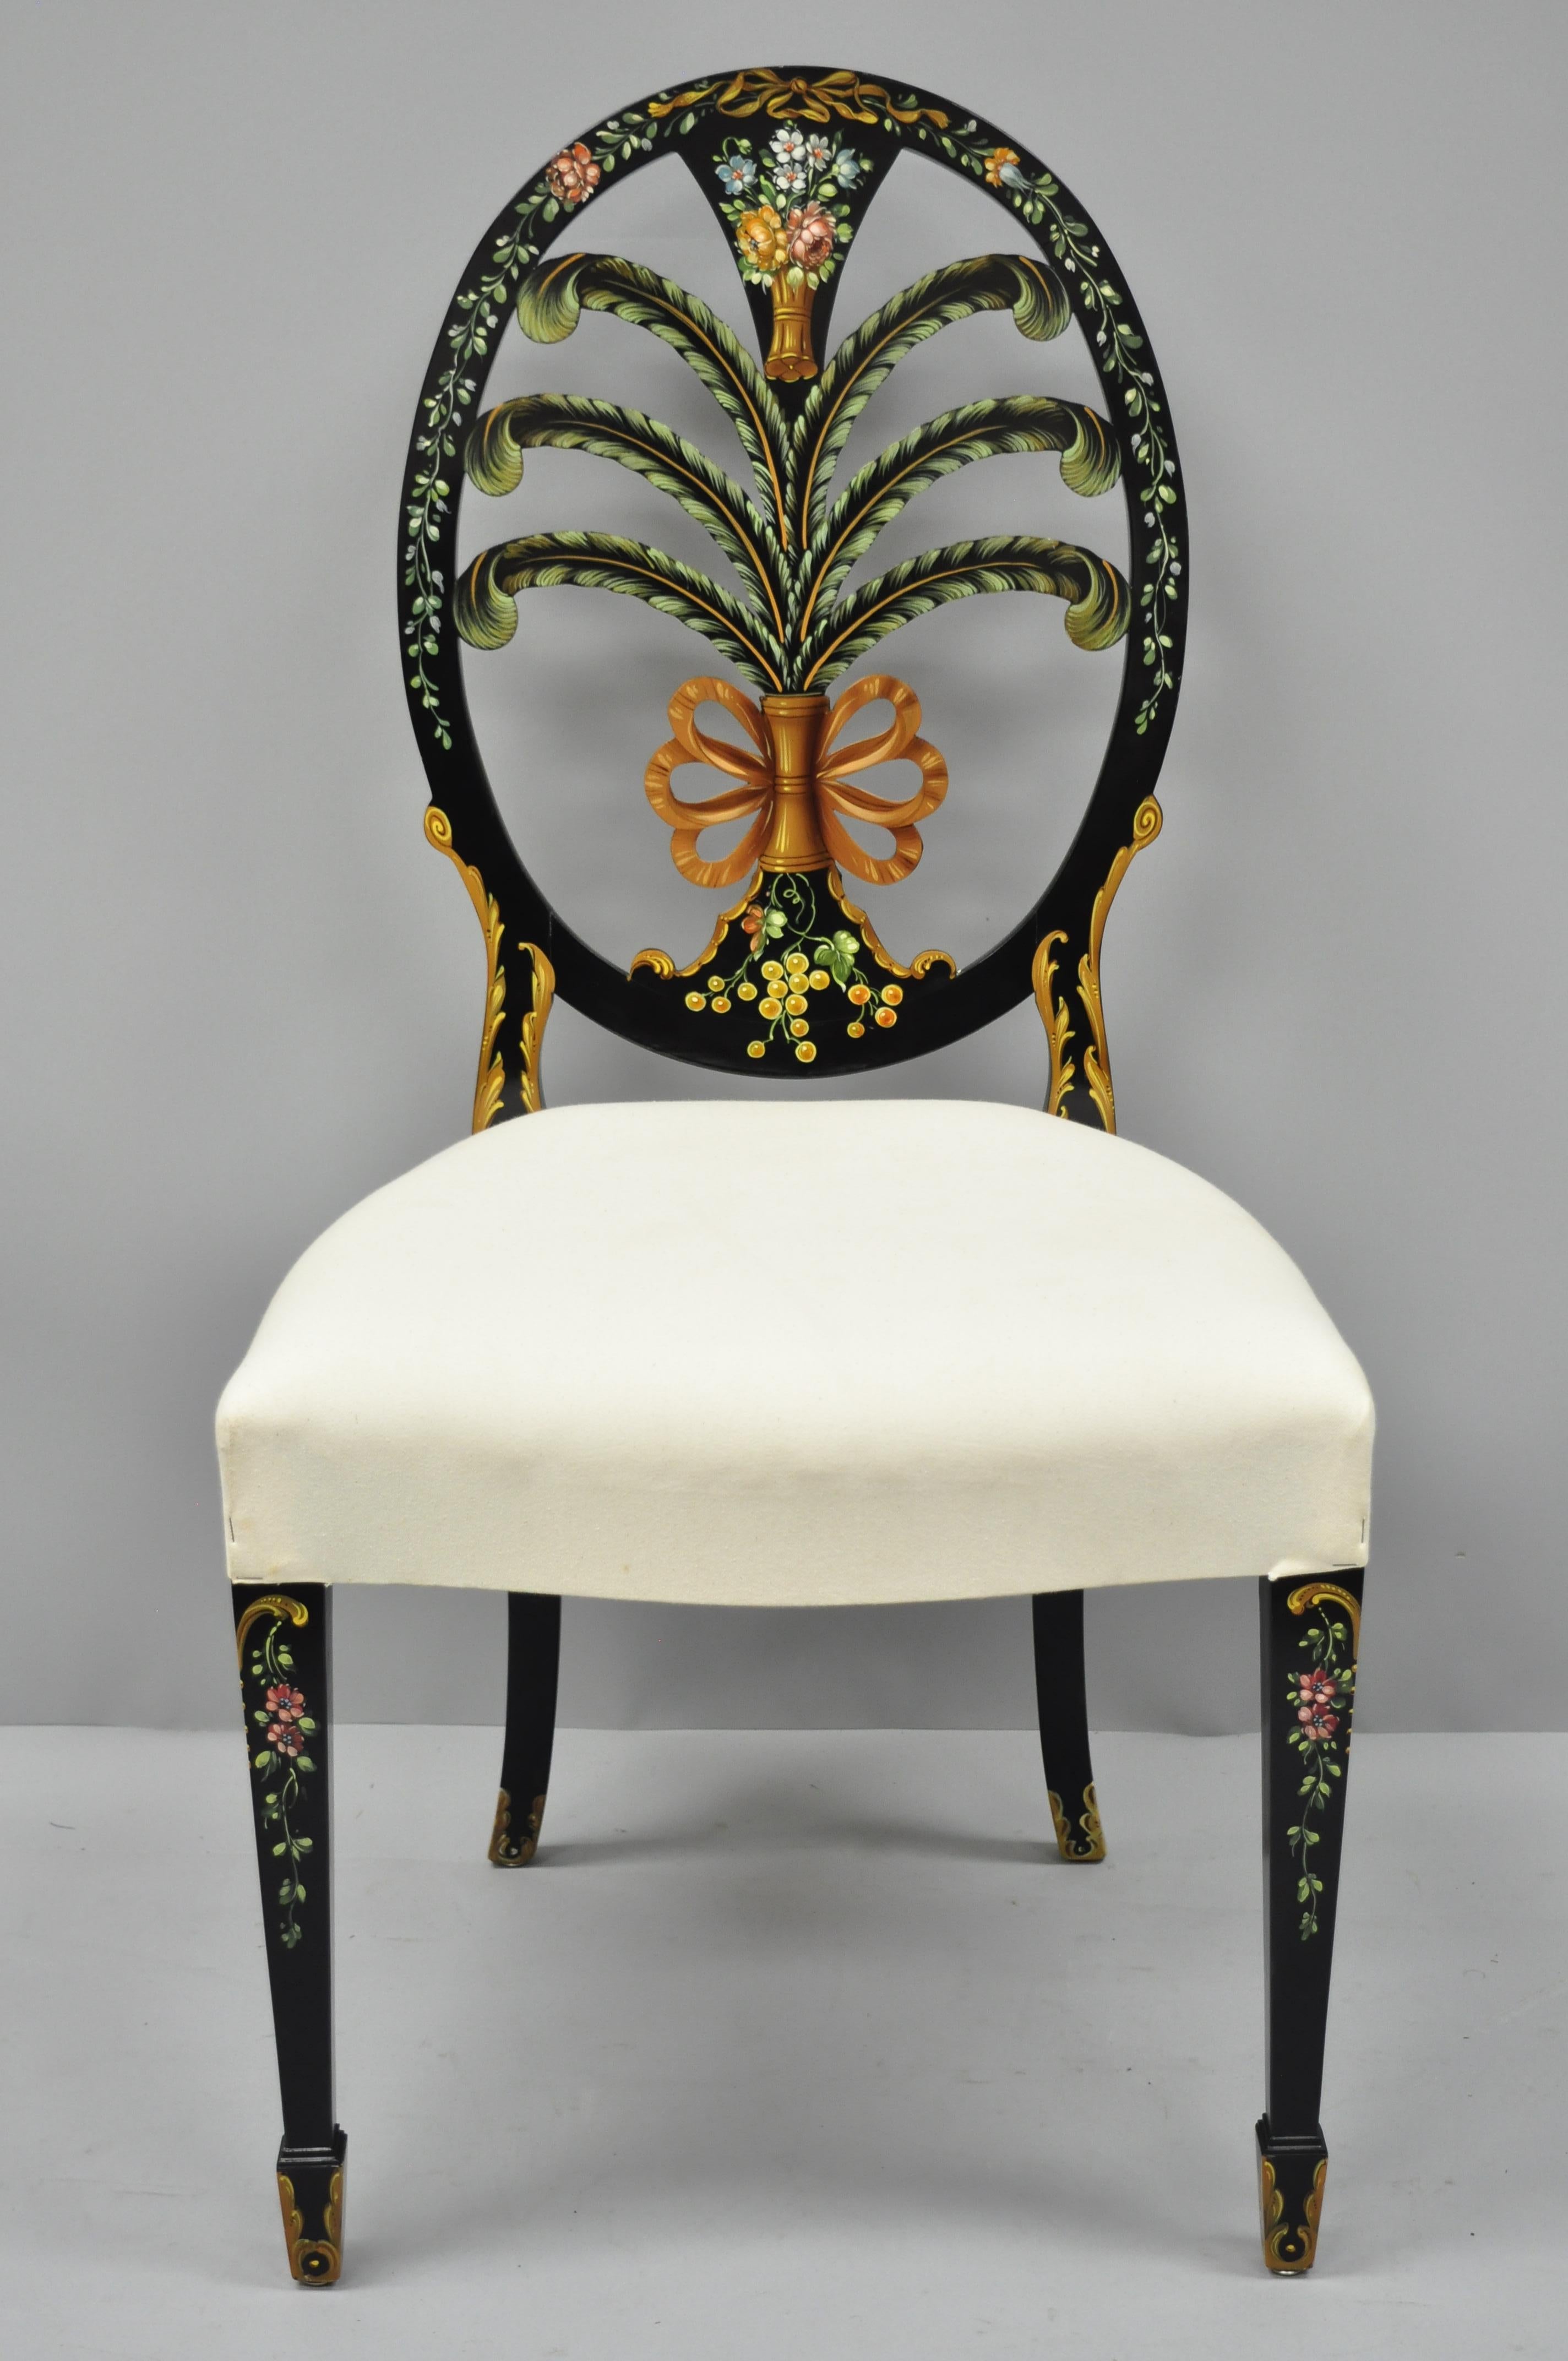 Hand-painted Adams style plume carved ebonized side chair by Karges. Item features hand-painted floral decorated frame, ebonized finish, plume and ribbon carvings, fully painted on all sides including the back, and solid wood construction, circa